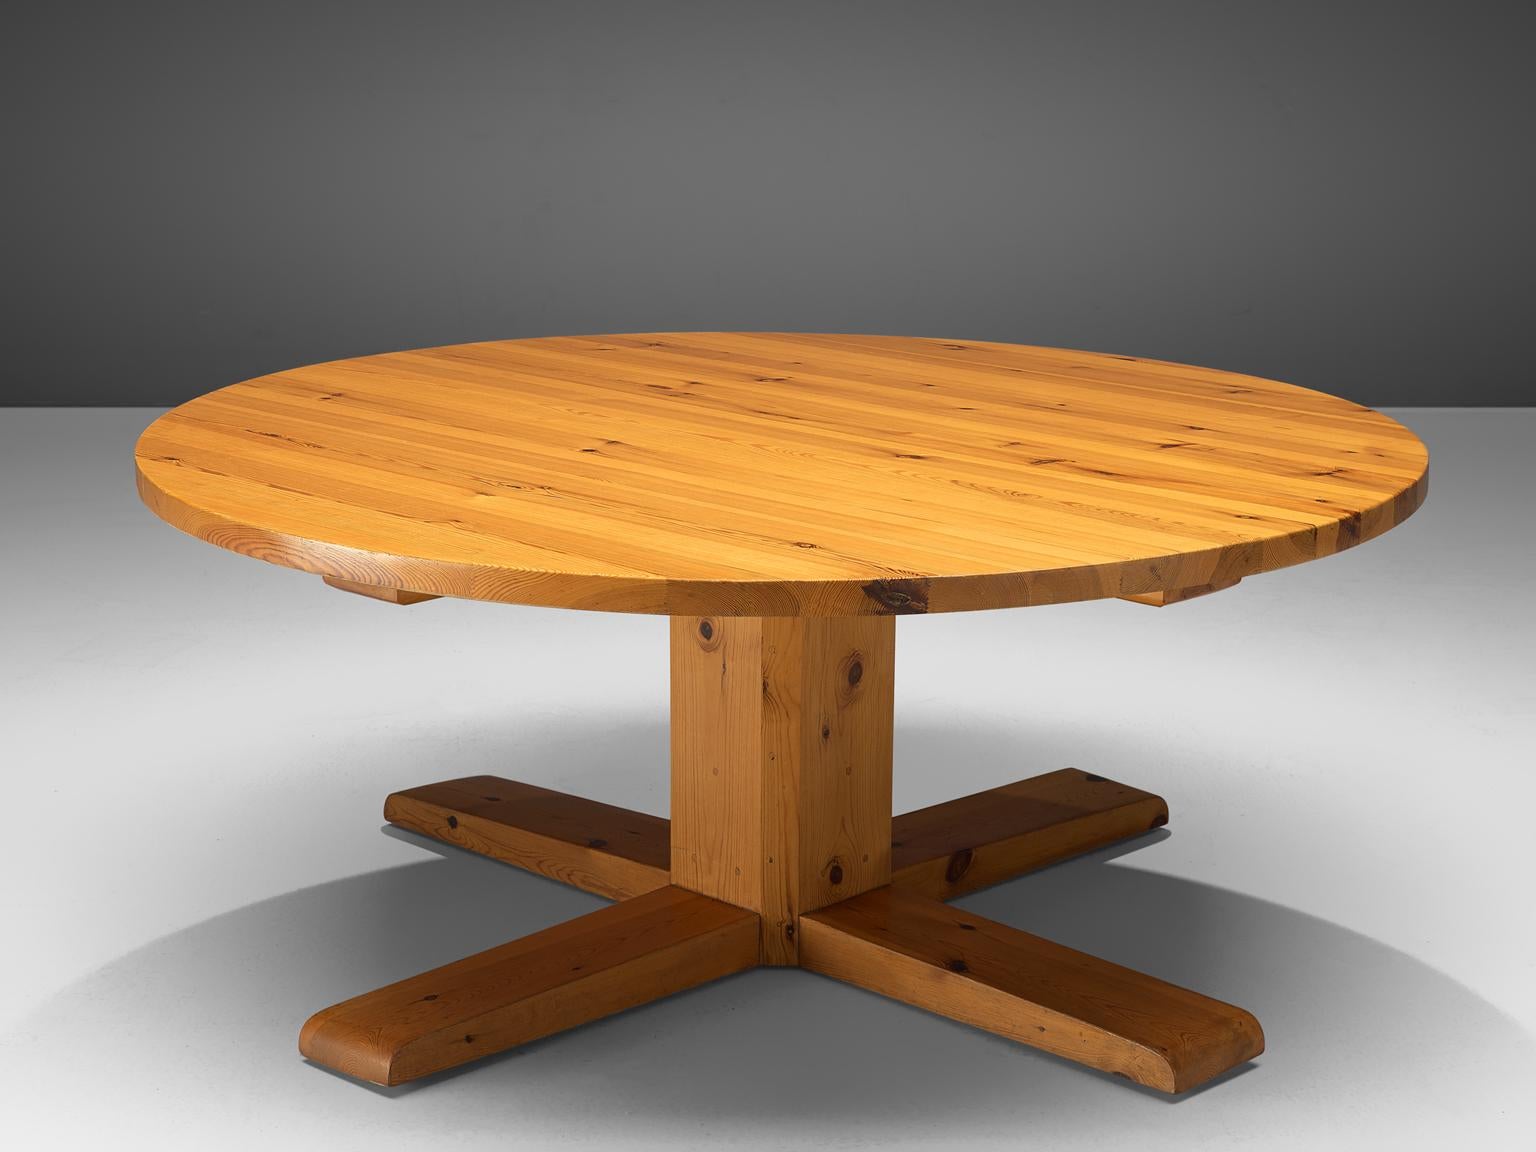 Dining table, solid valsain pine, Spain, 1950s.

This remarkable table holds a strong expression due to several aspects that are all typical for Spanish Midcentury design. First the use of solid pine wood holds a rural and robust aesthetic that